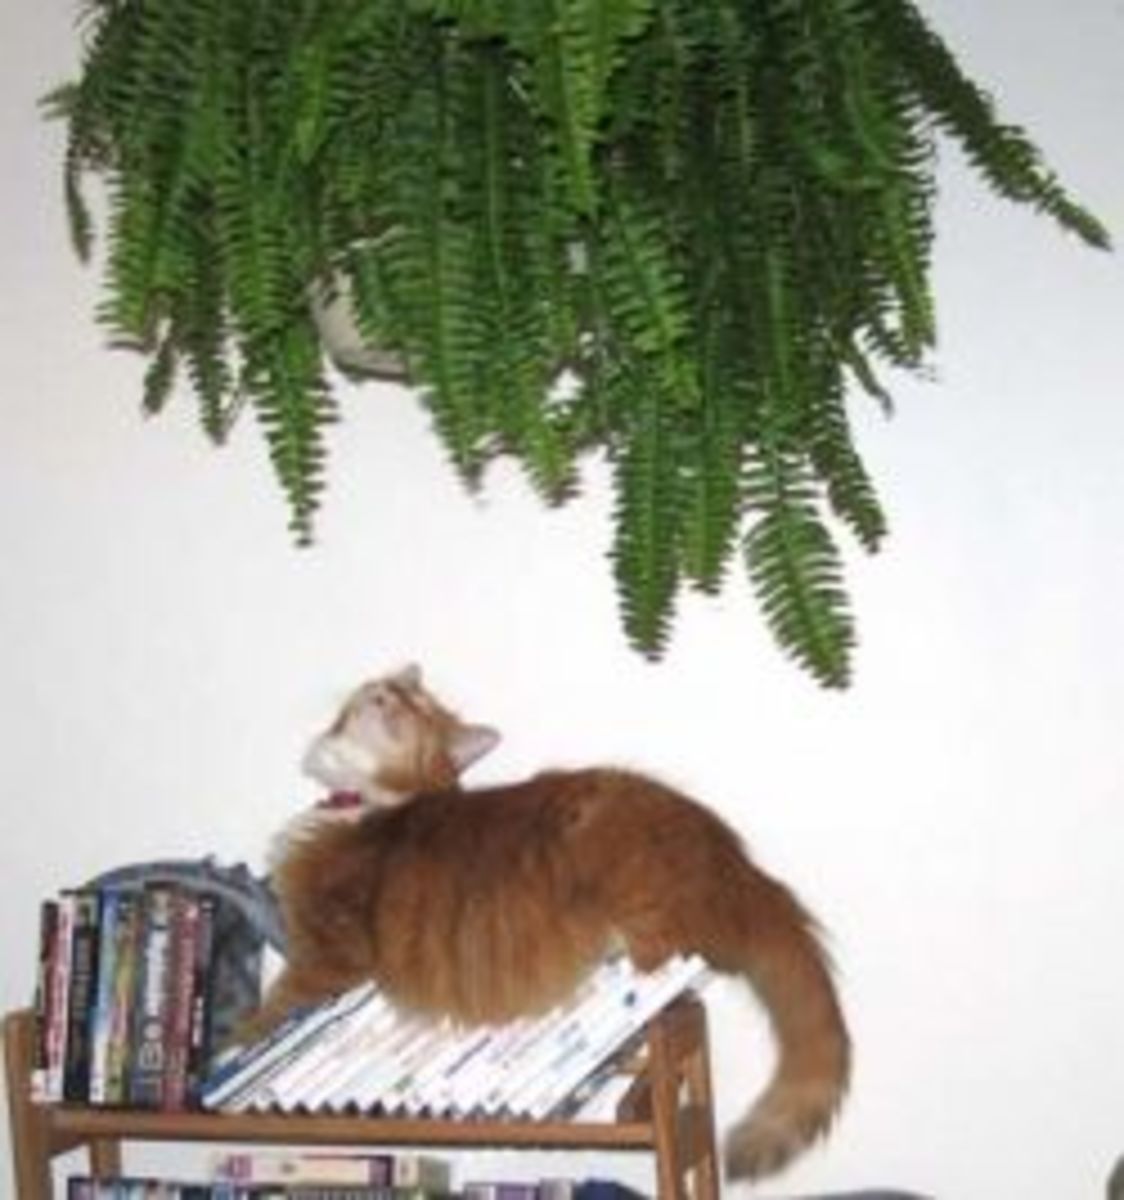 Rupert was watching the Fern of Doom day in and day out.